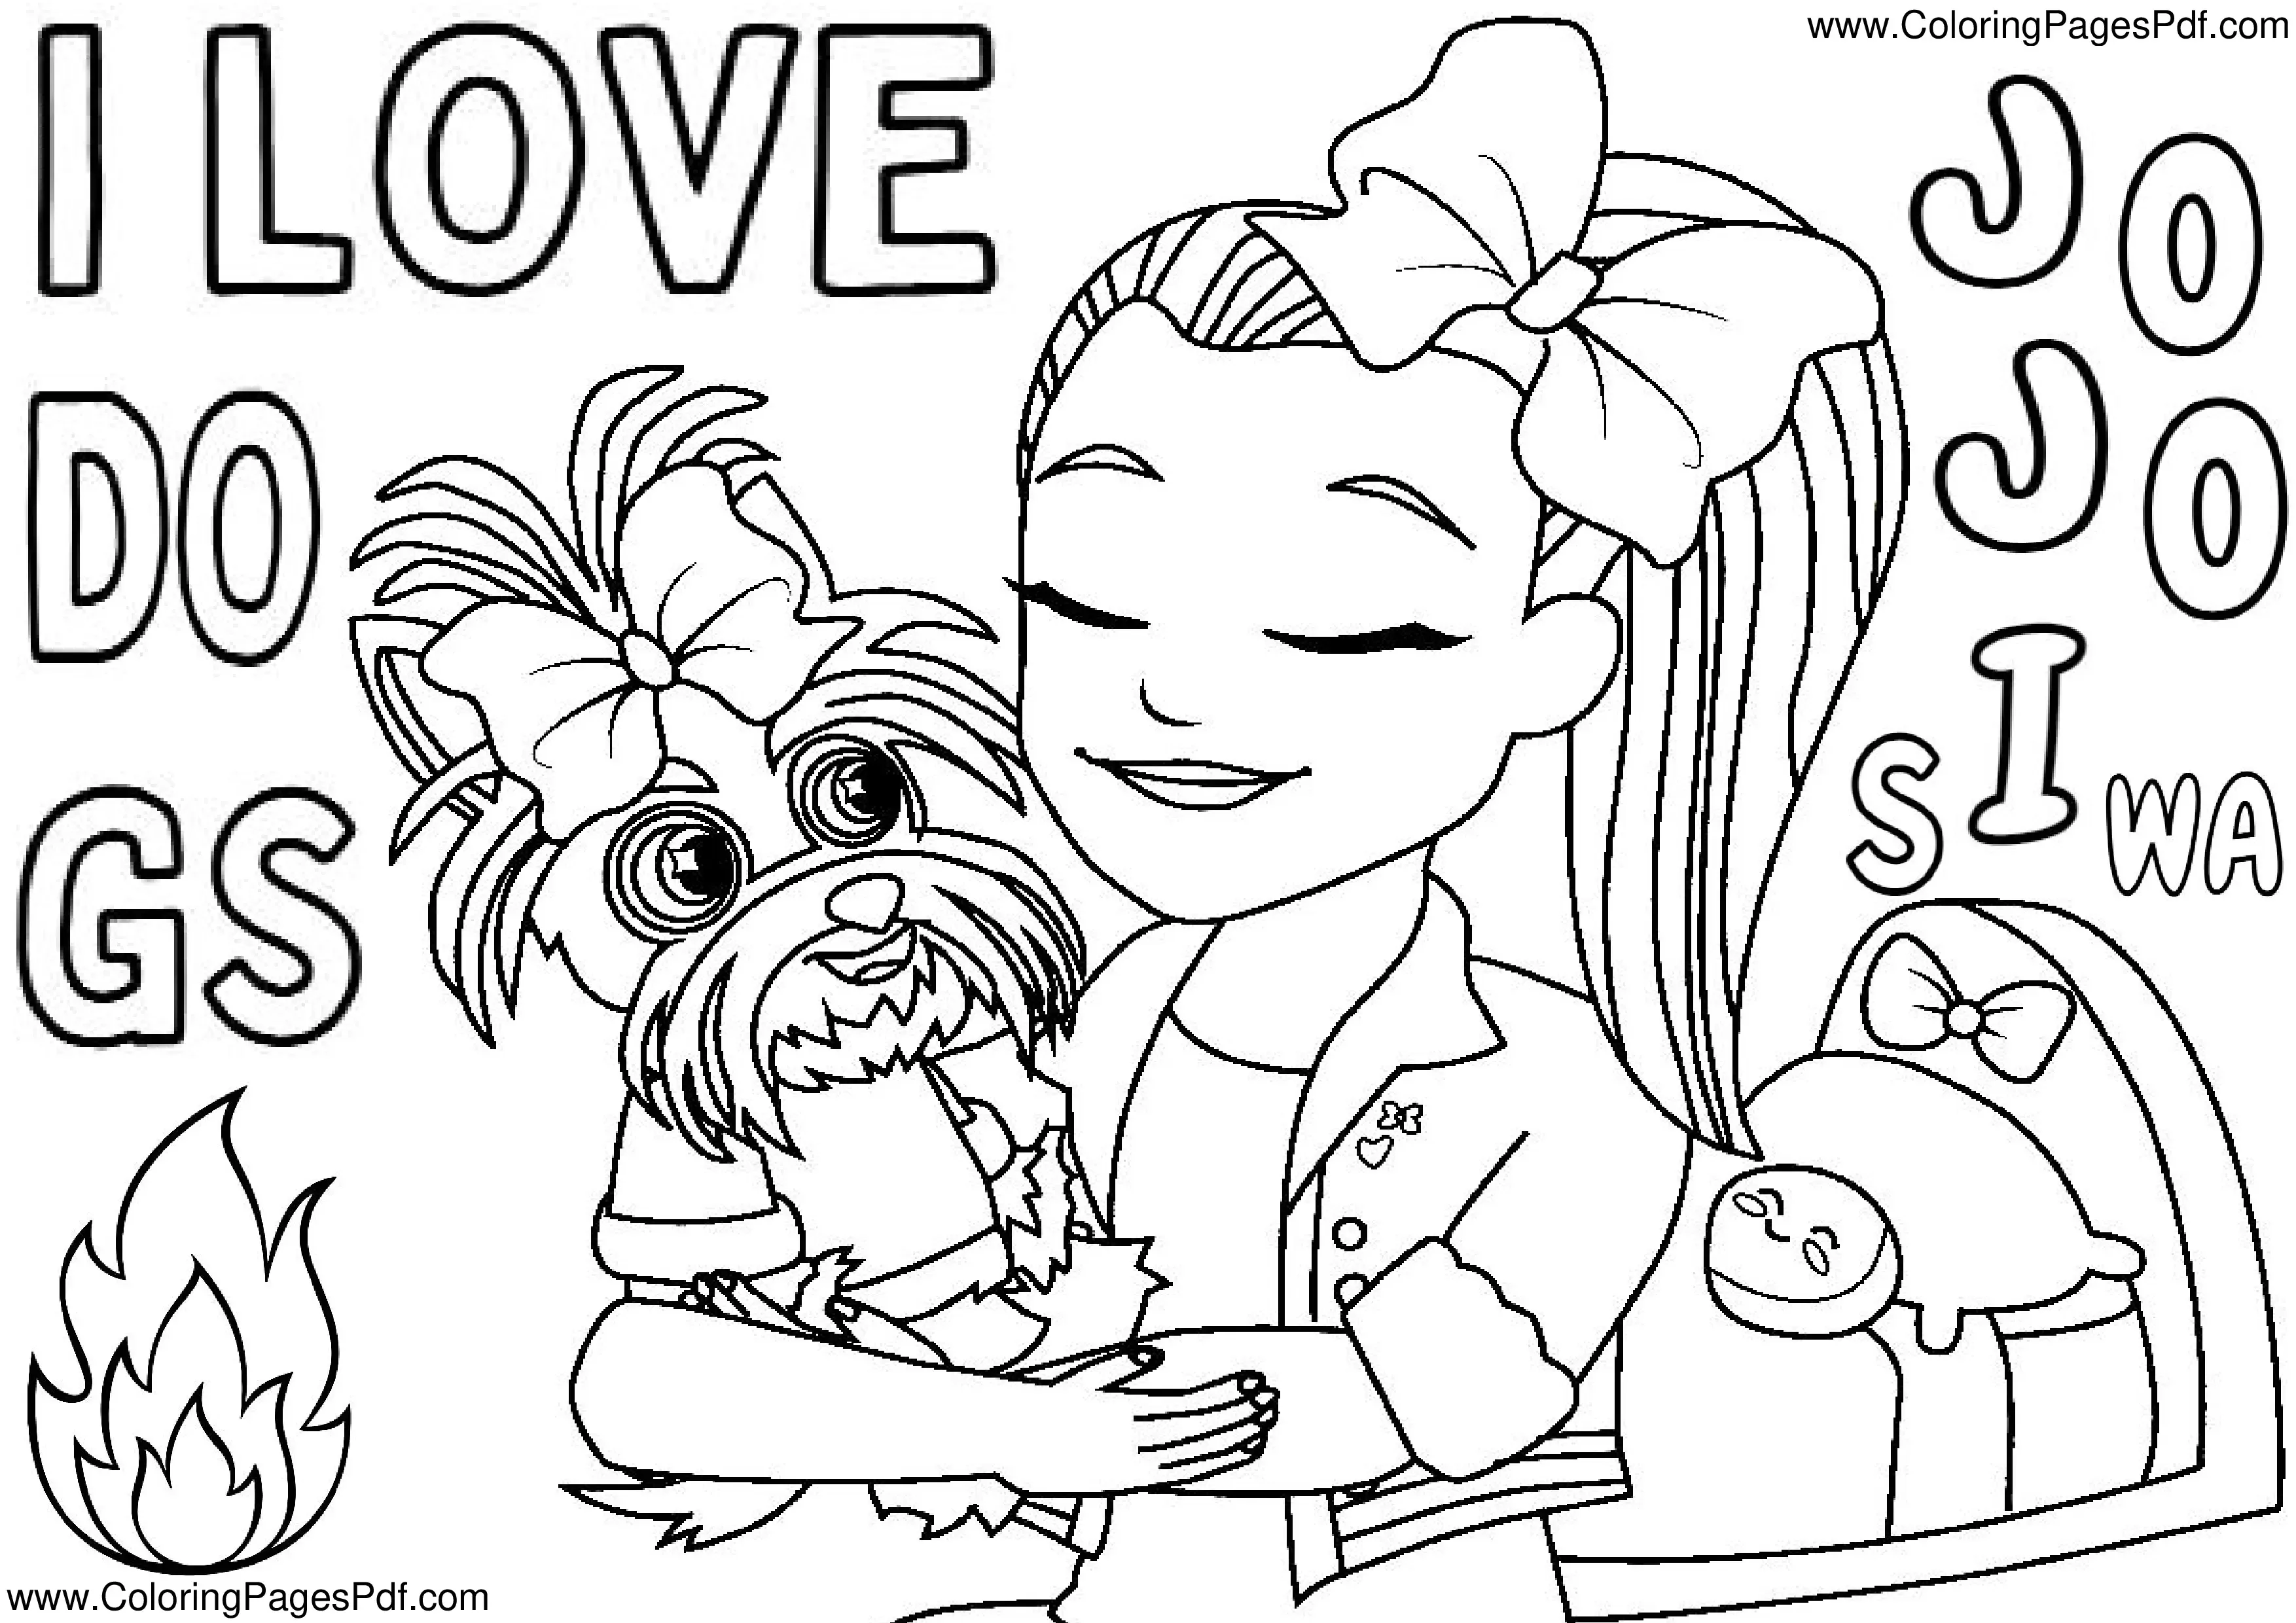 Jojo siwa coloring pages for adults